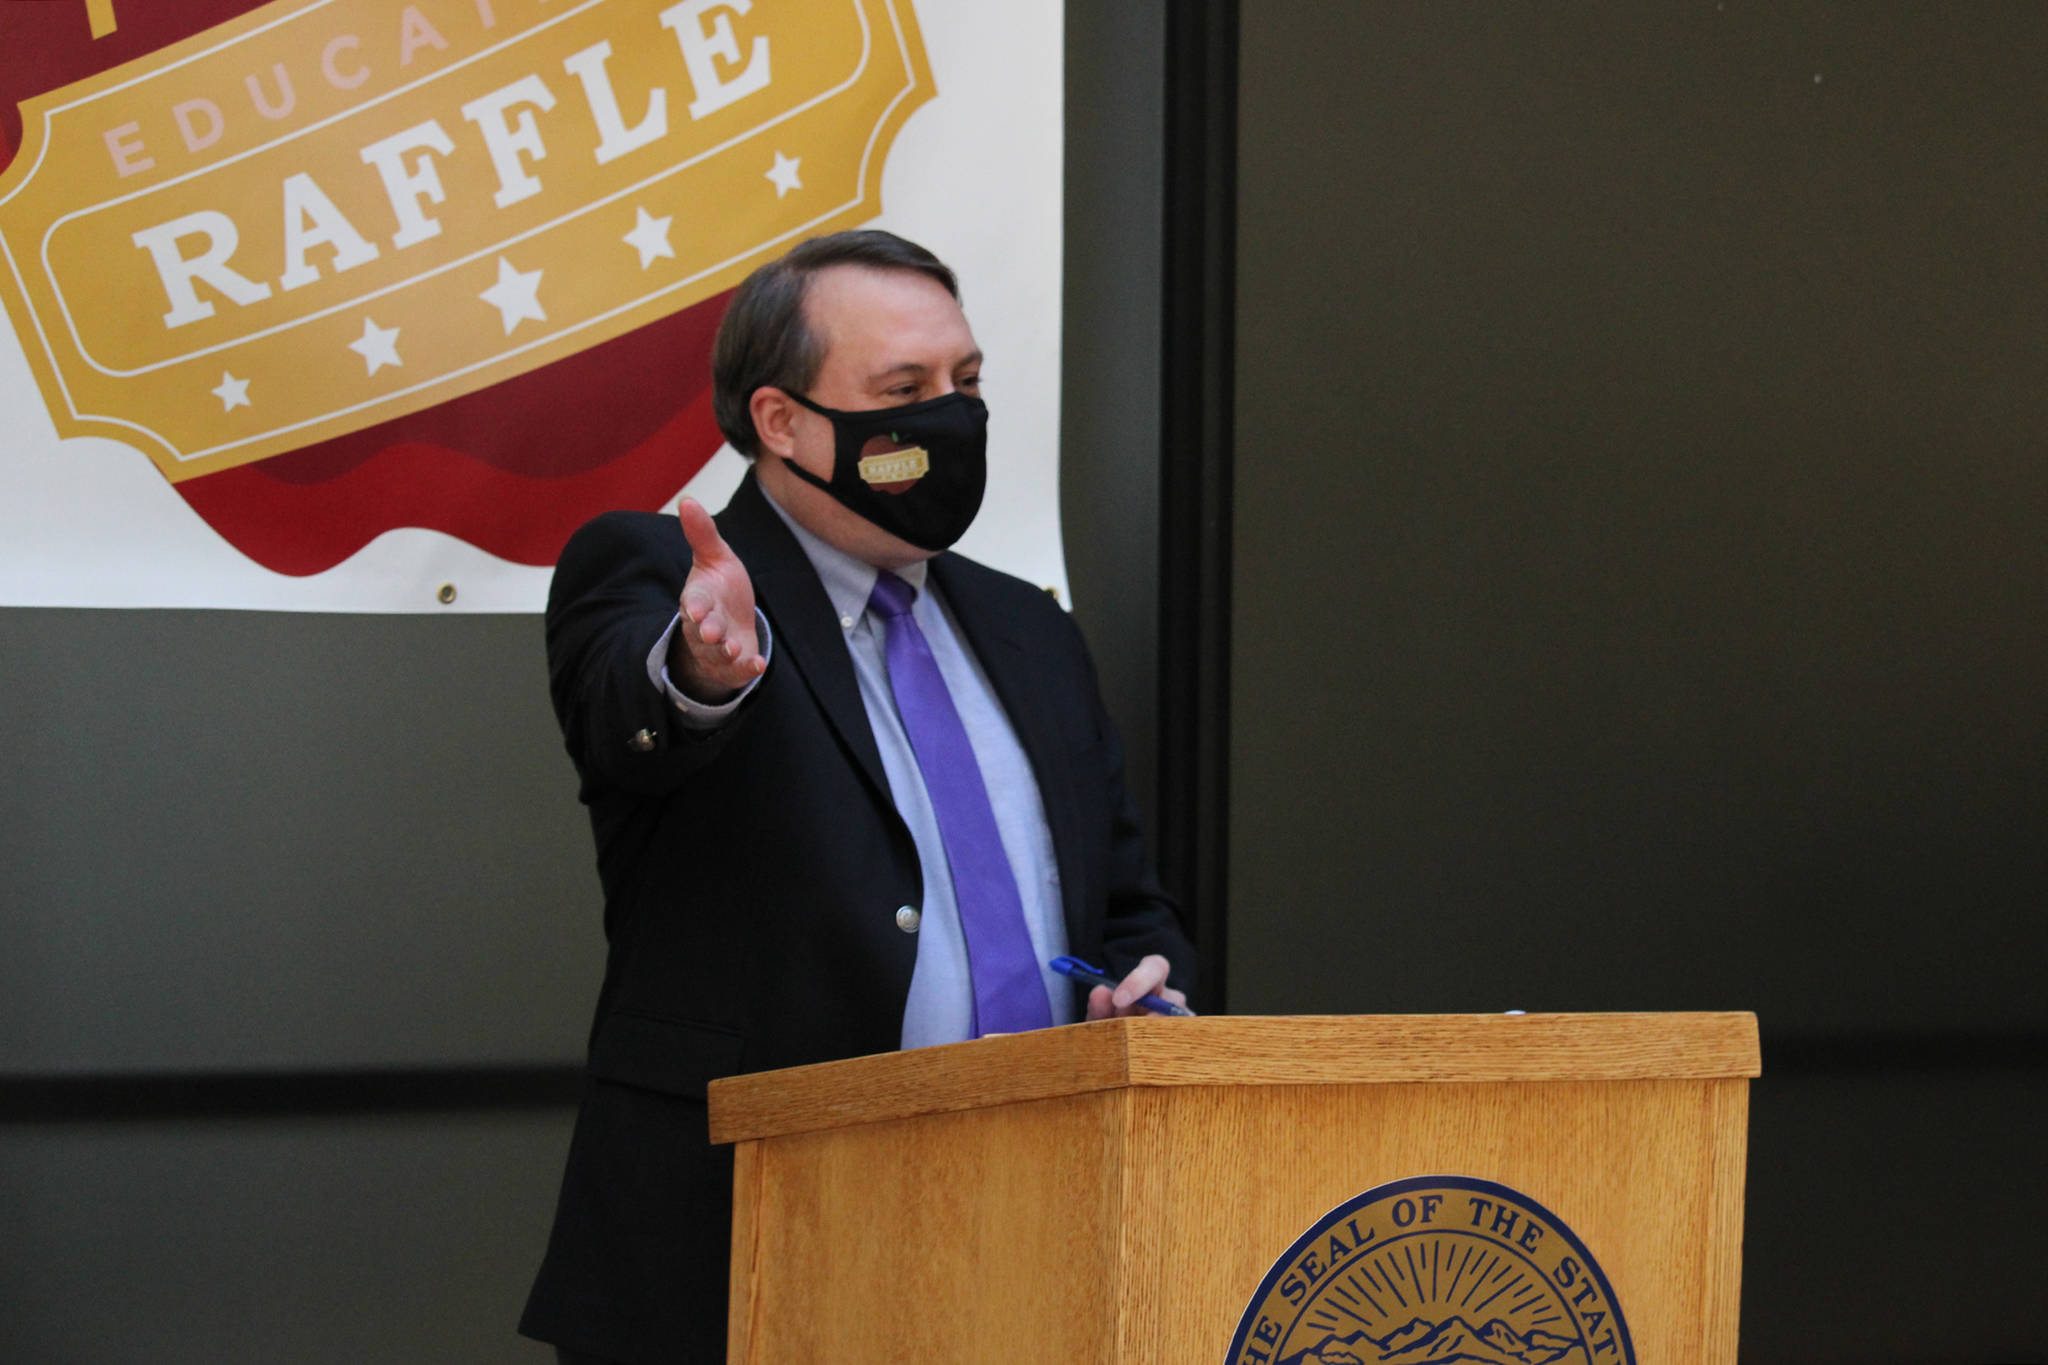 Mike Barnhill, deputy commisioner of the Alaska Department of Revenue, speaks following the drawing of names during the second annual PFD Education Raffle. During the event, state officials and lawmakers wore masks with an education raffle logo. (Ben Hohenstatt / Juneau Empire)